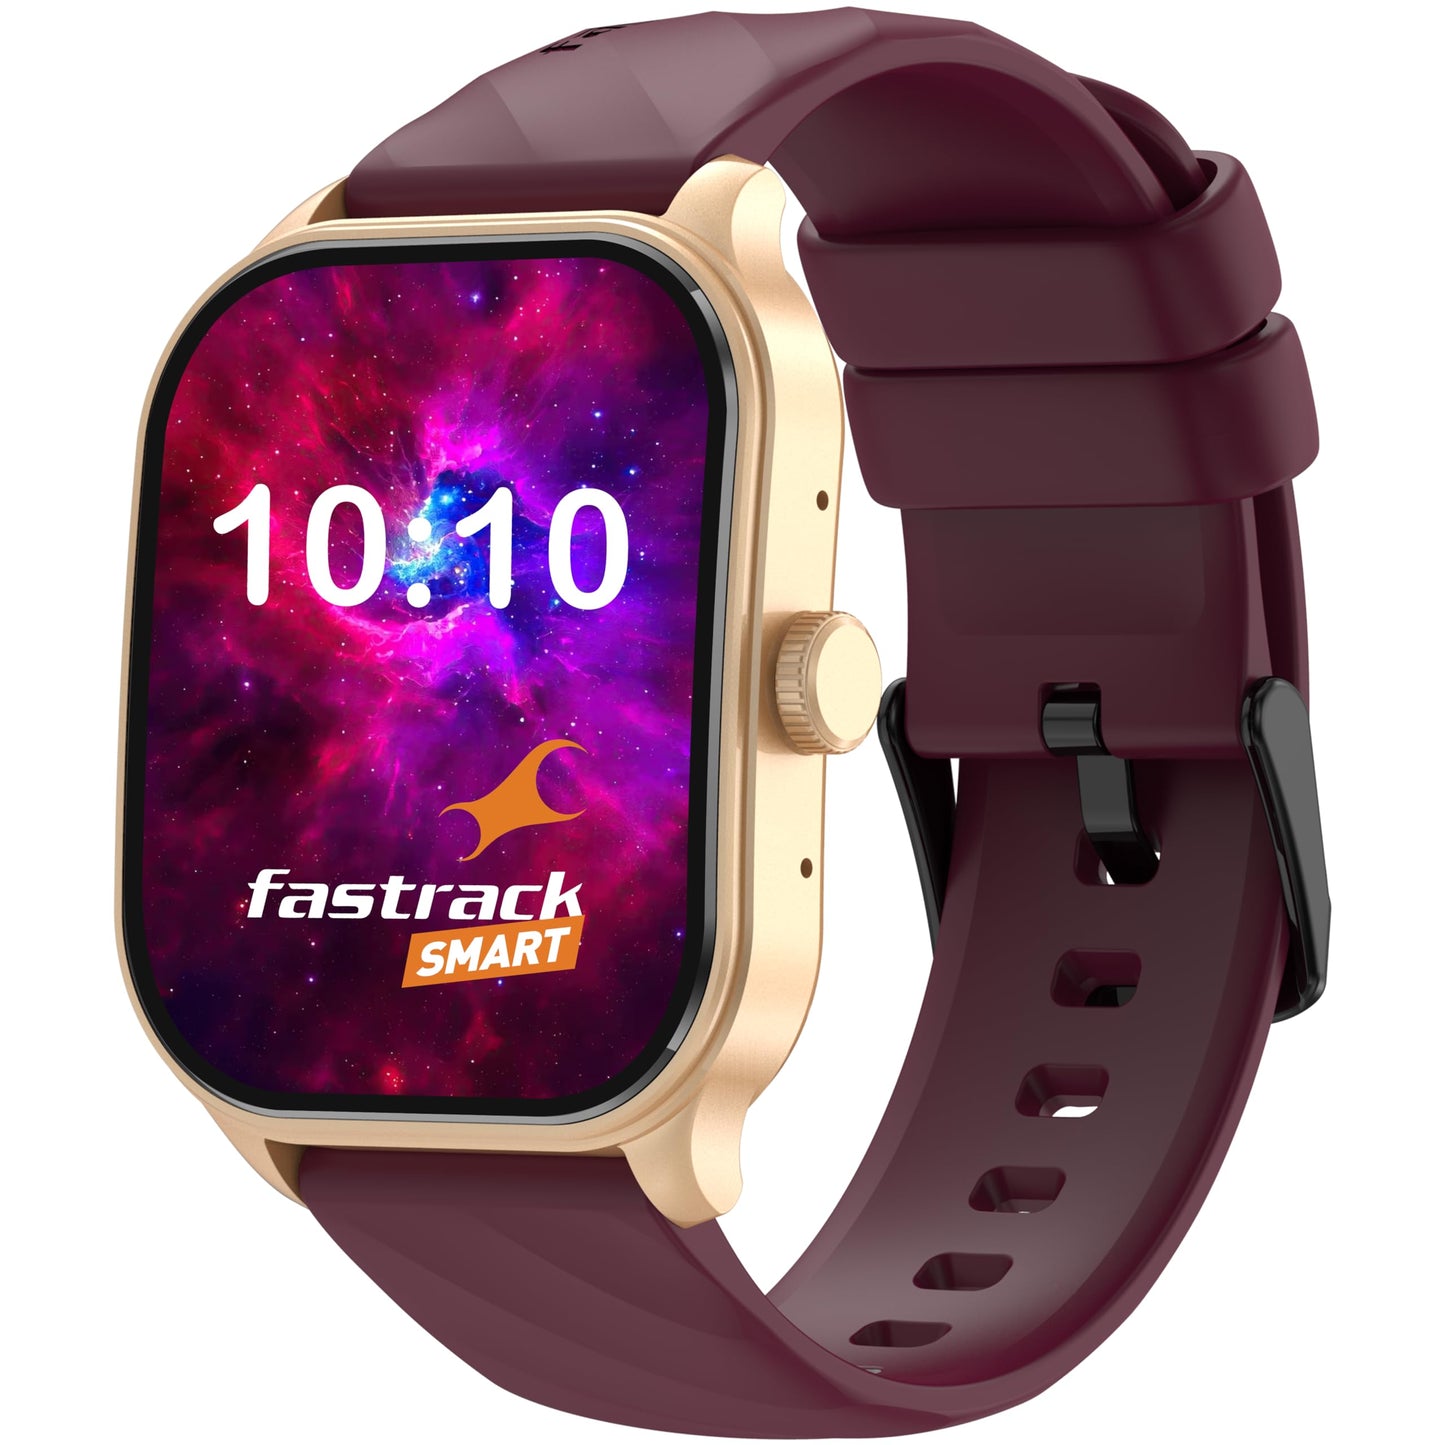 Fastrack FS1 Pro Smartwatch|World’s First 1.96" Super AMOLED Arched Display with Highest Resolution of 410x502|SingleSync BT Calling|NitroFast Charging|110+ Sports Modes|200+ Watchfaces